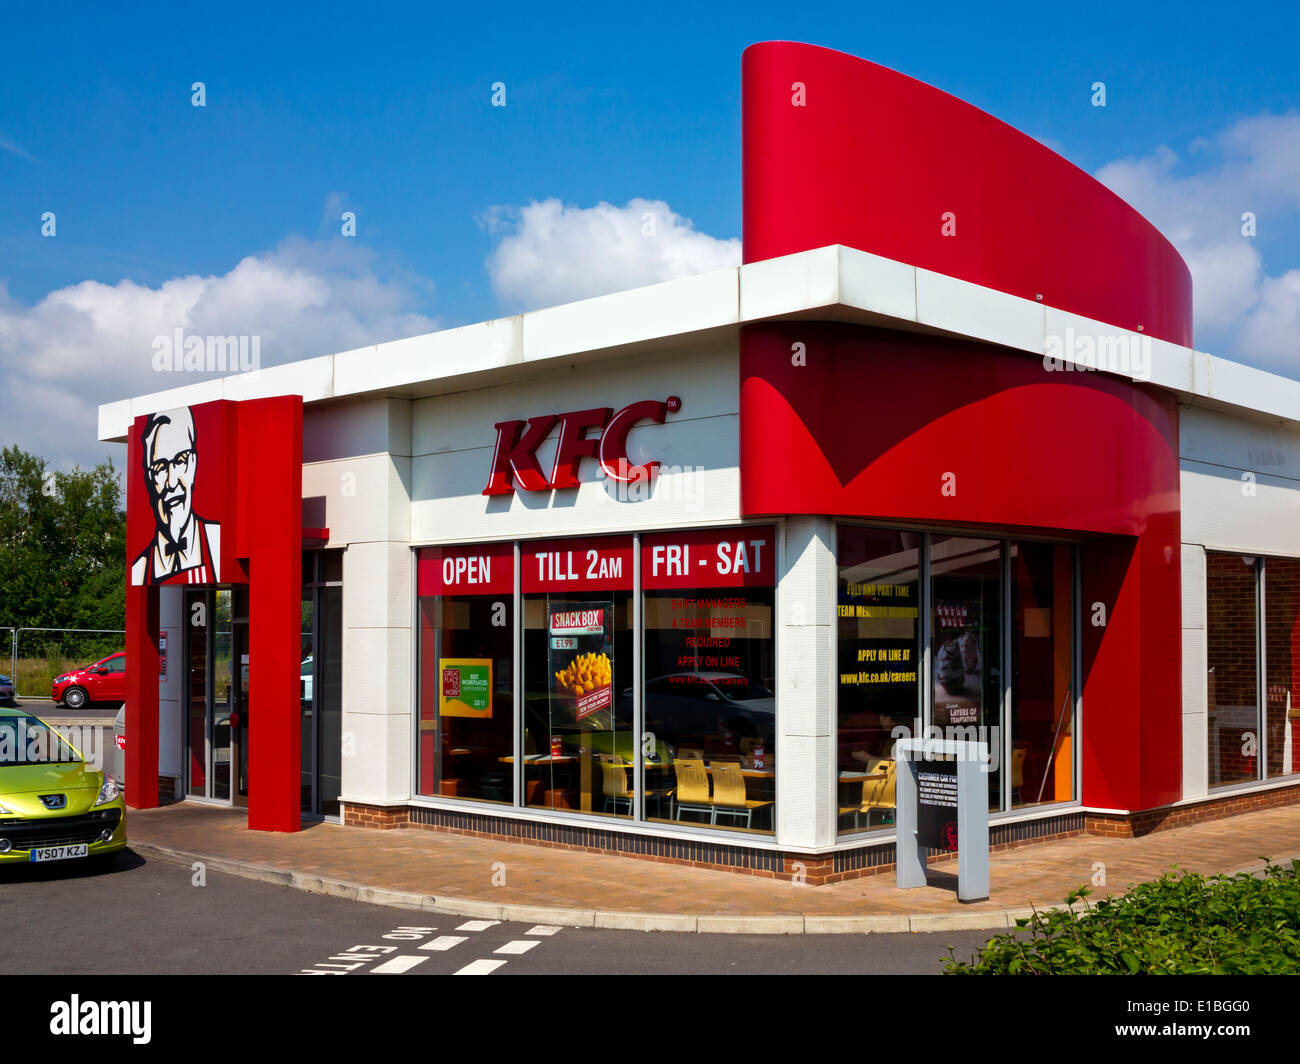 KFC drive in fast food restaurant in Chesterfield Derbyshire England with car parked outside Stock Photo